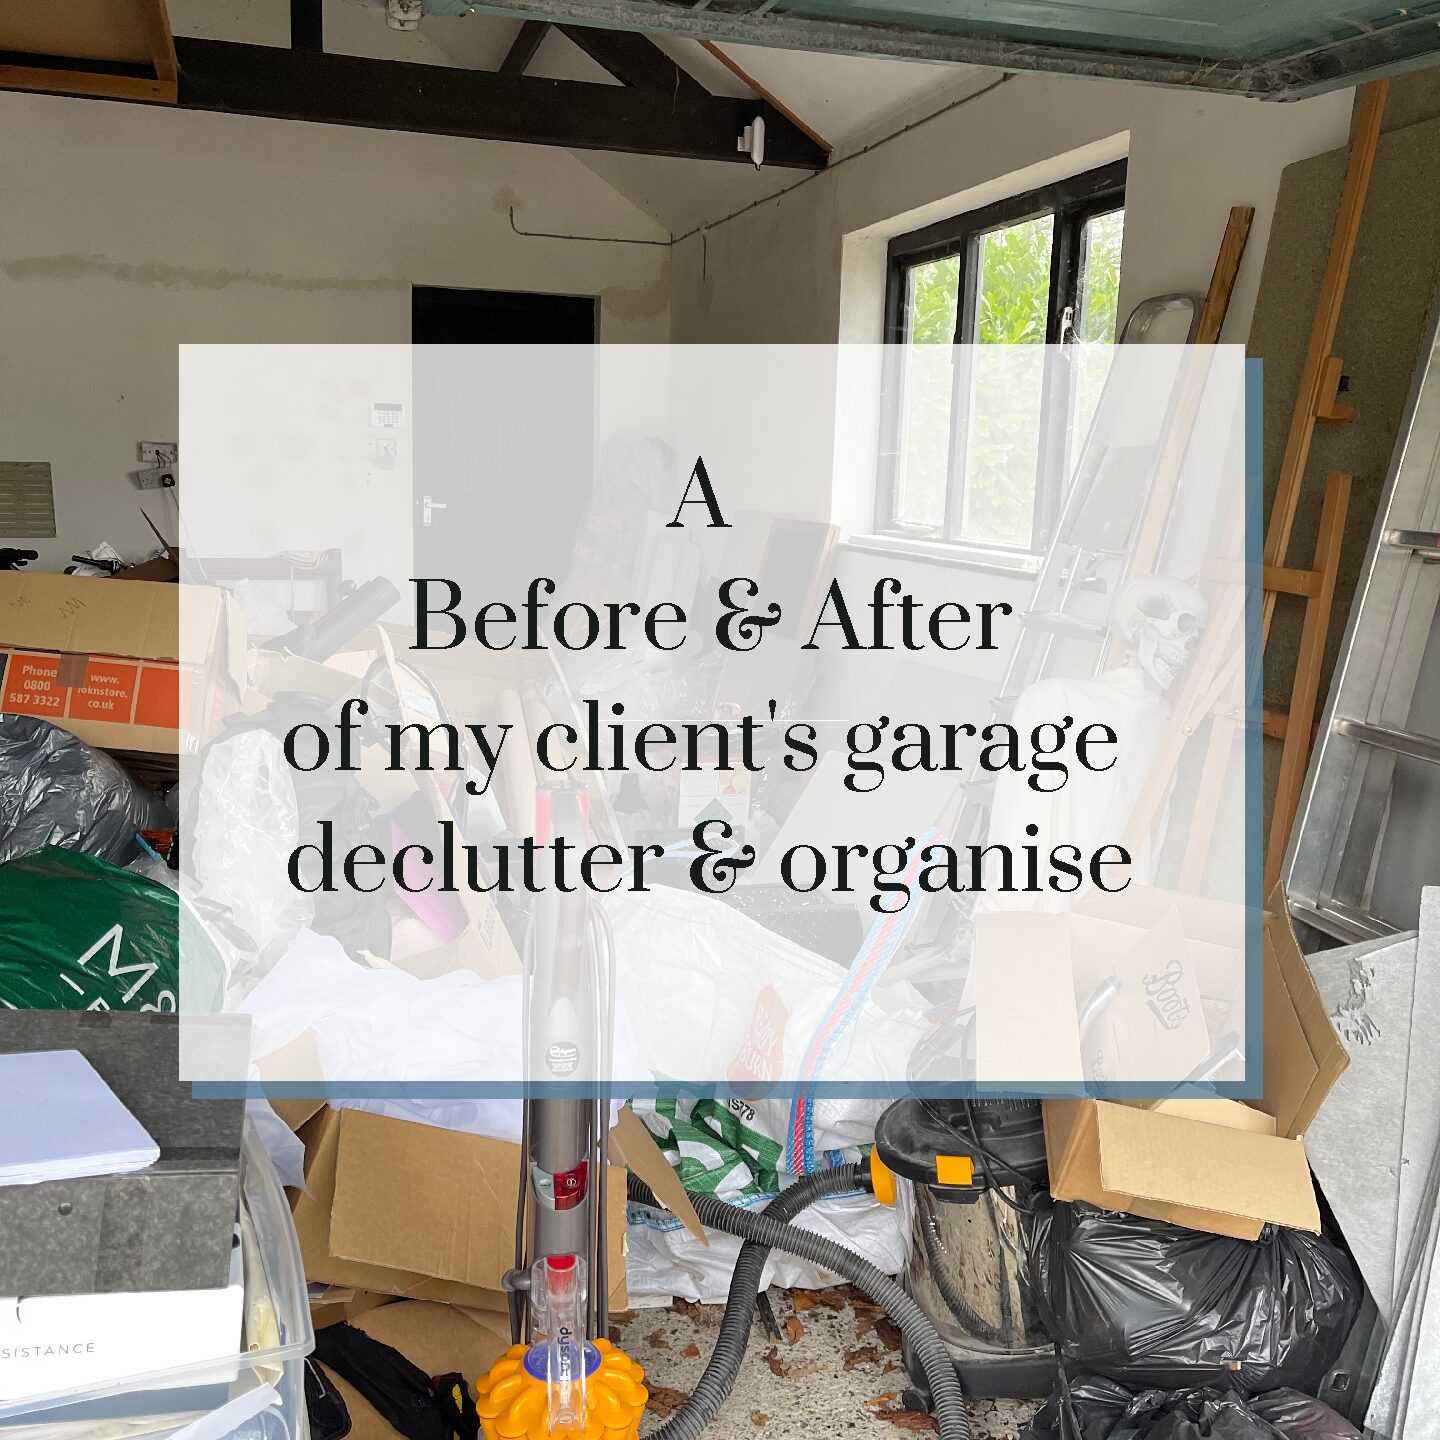 A Before & After of my client’s garage declutter & organise